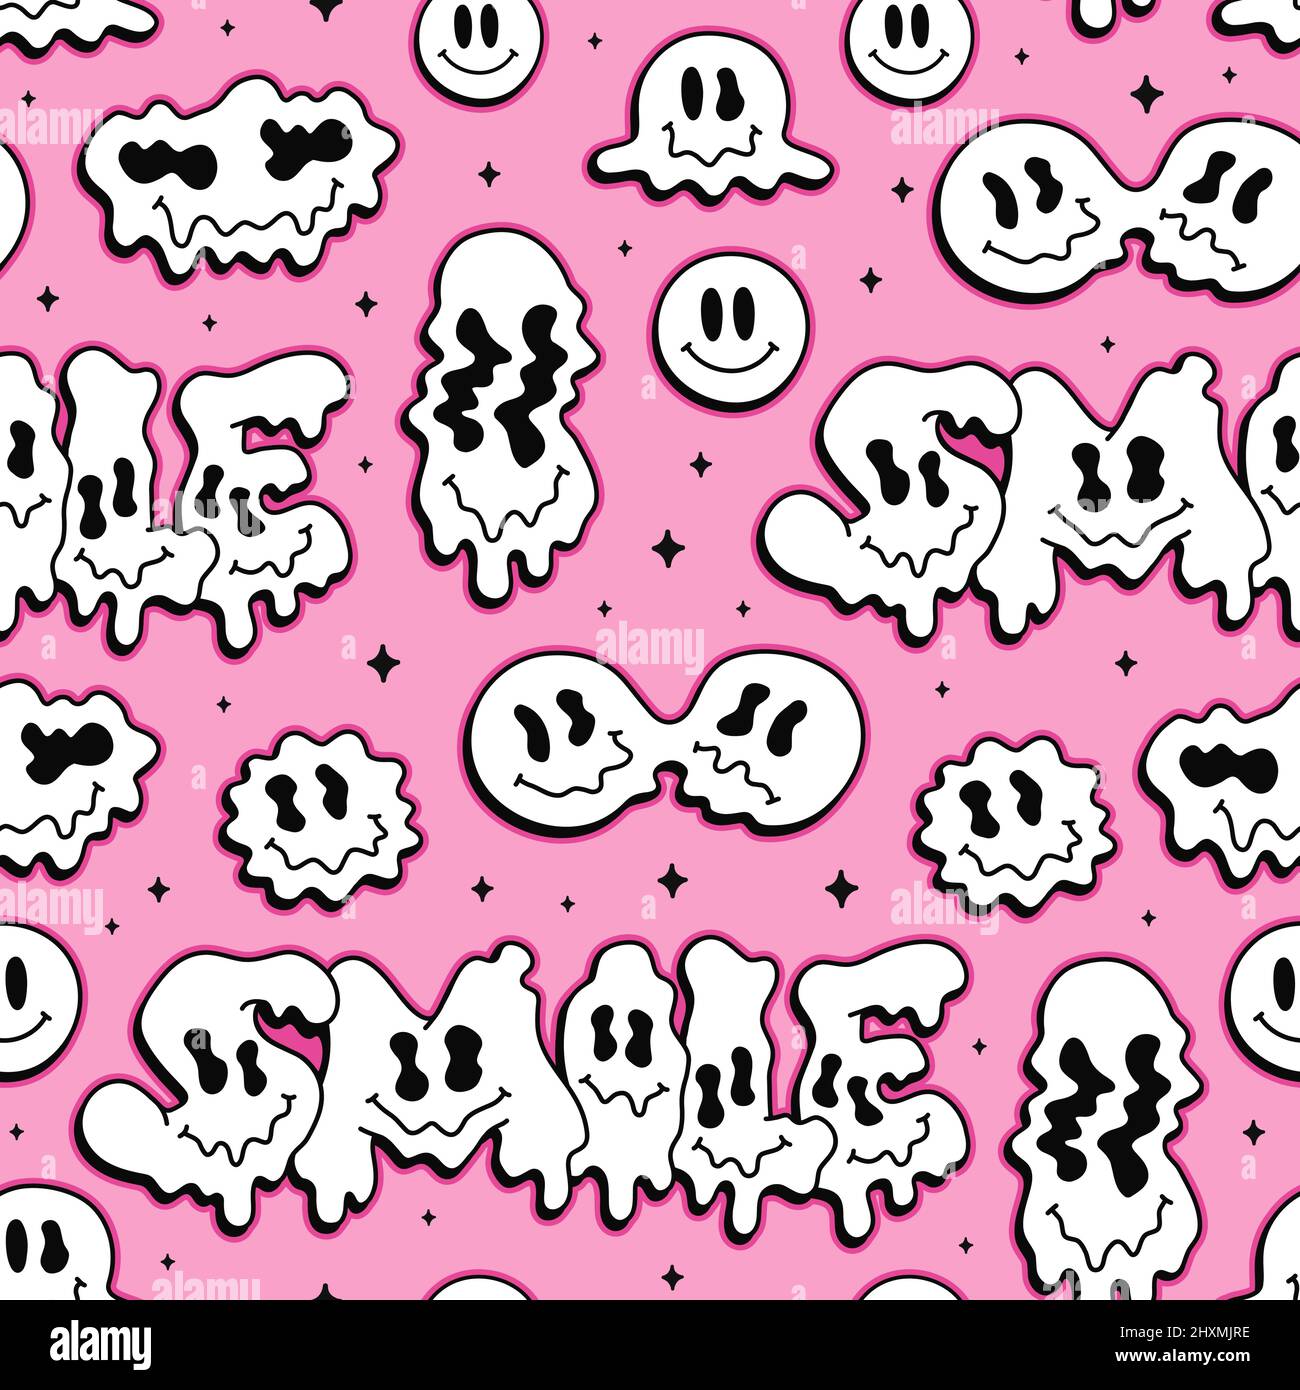 Funny melt warp smile faces,psychedelic emoji seamless pattern.Vector cool cartoon character illustration.Smile faces graphic,melt,acid,drugs,60s,70s,90s trippy seamless pattern wallpaper print art Stock Vector